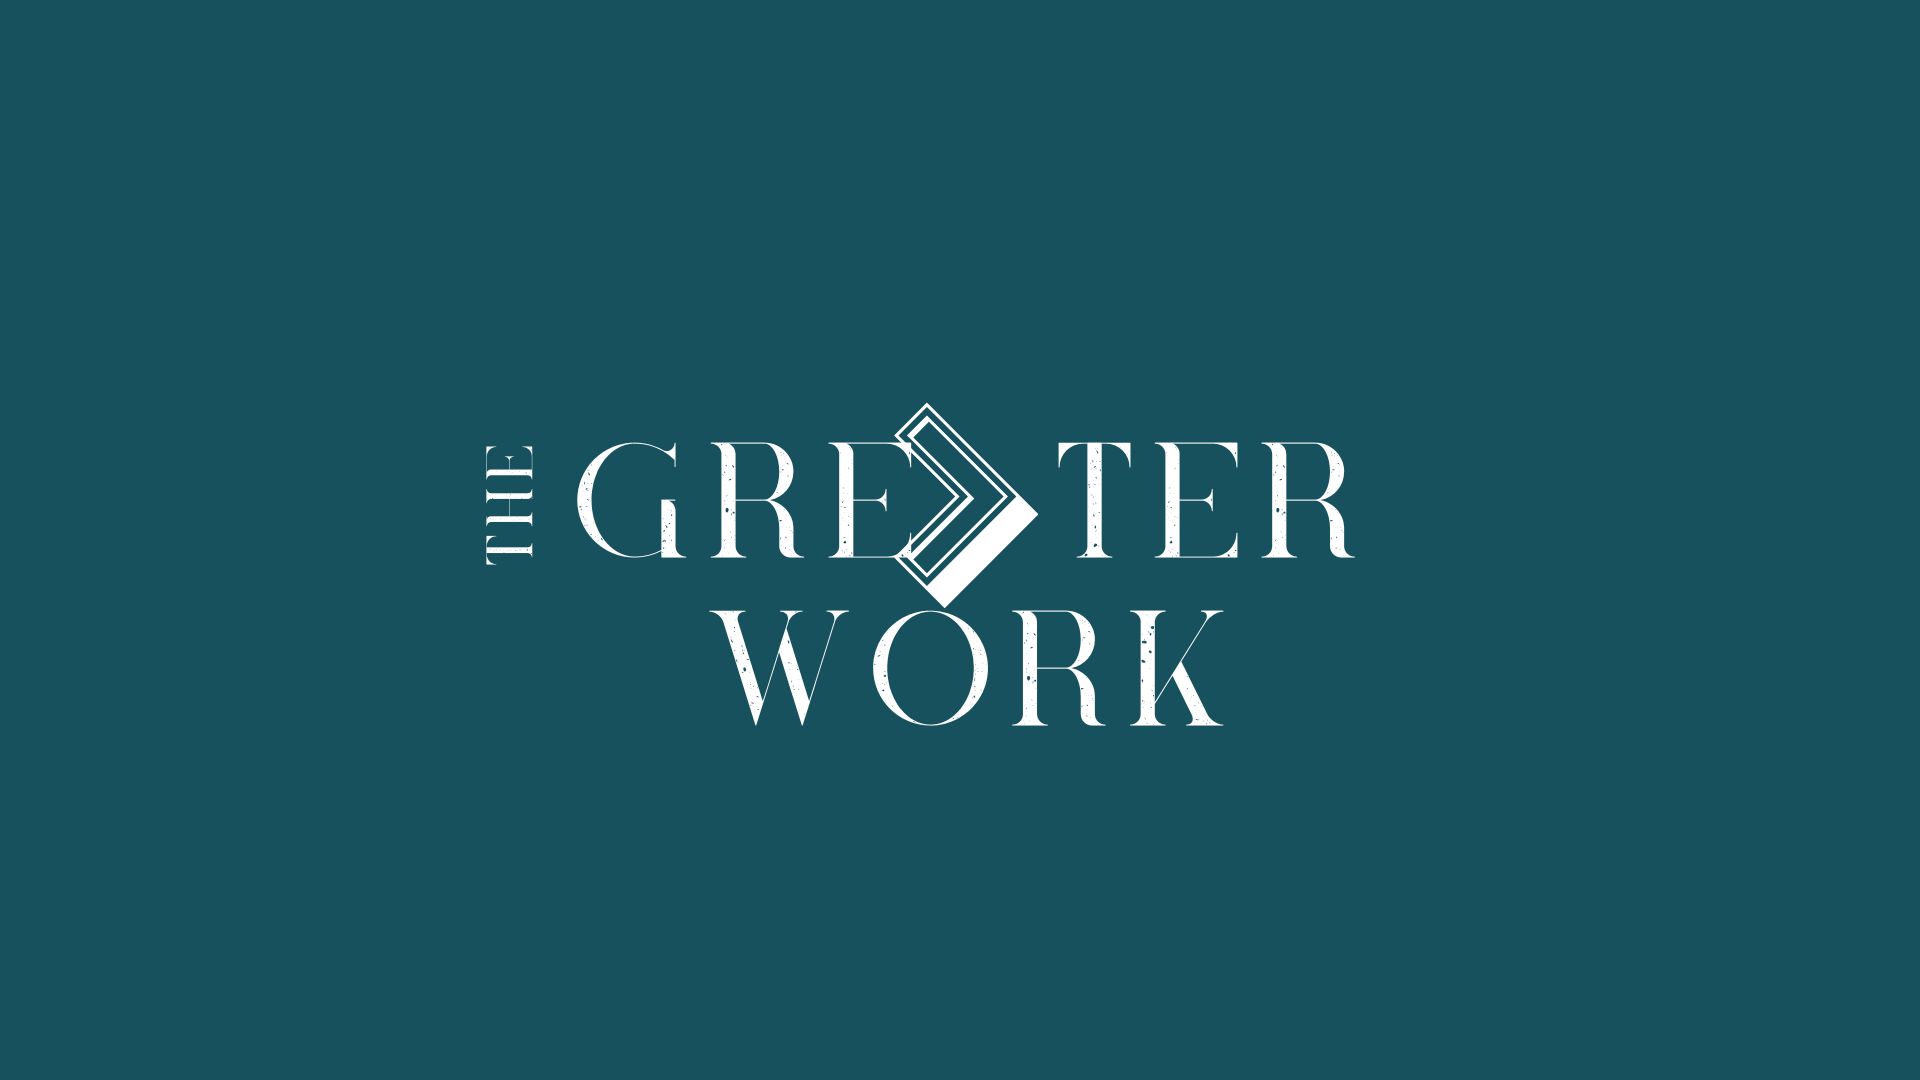 Why Should I Keep Praying? - The Greater Works Sermon Series